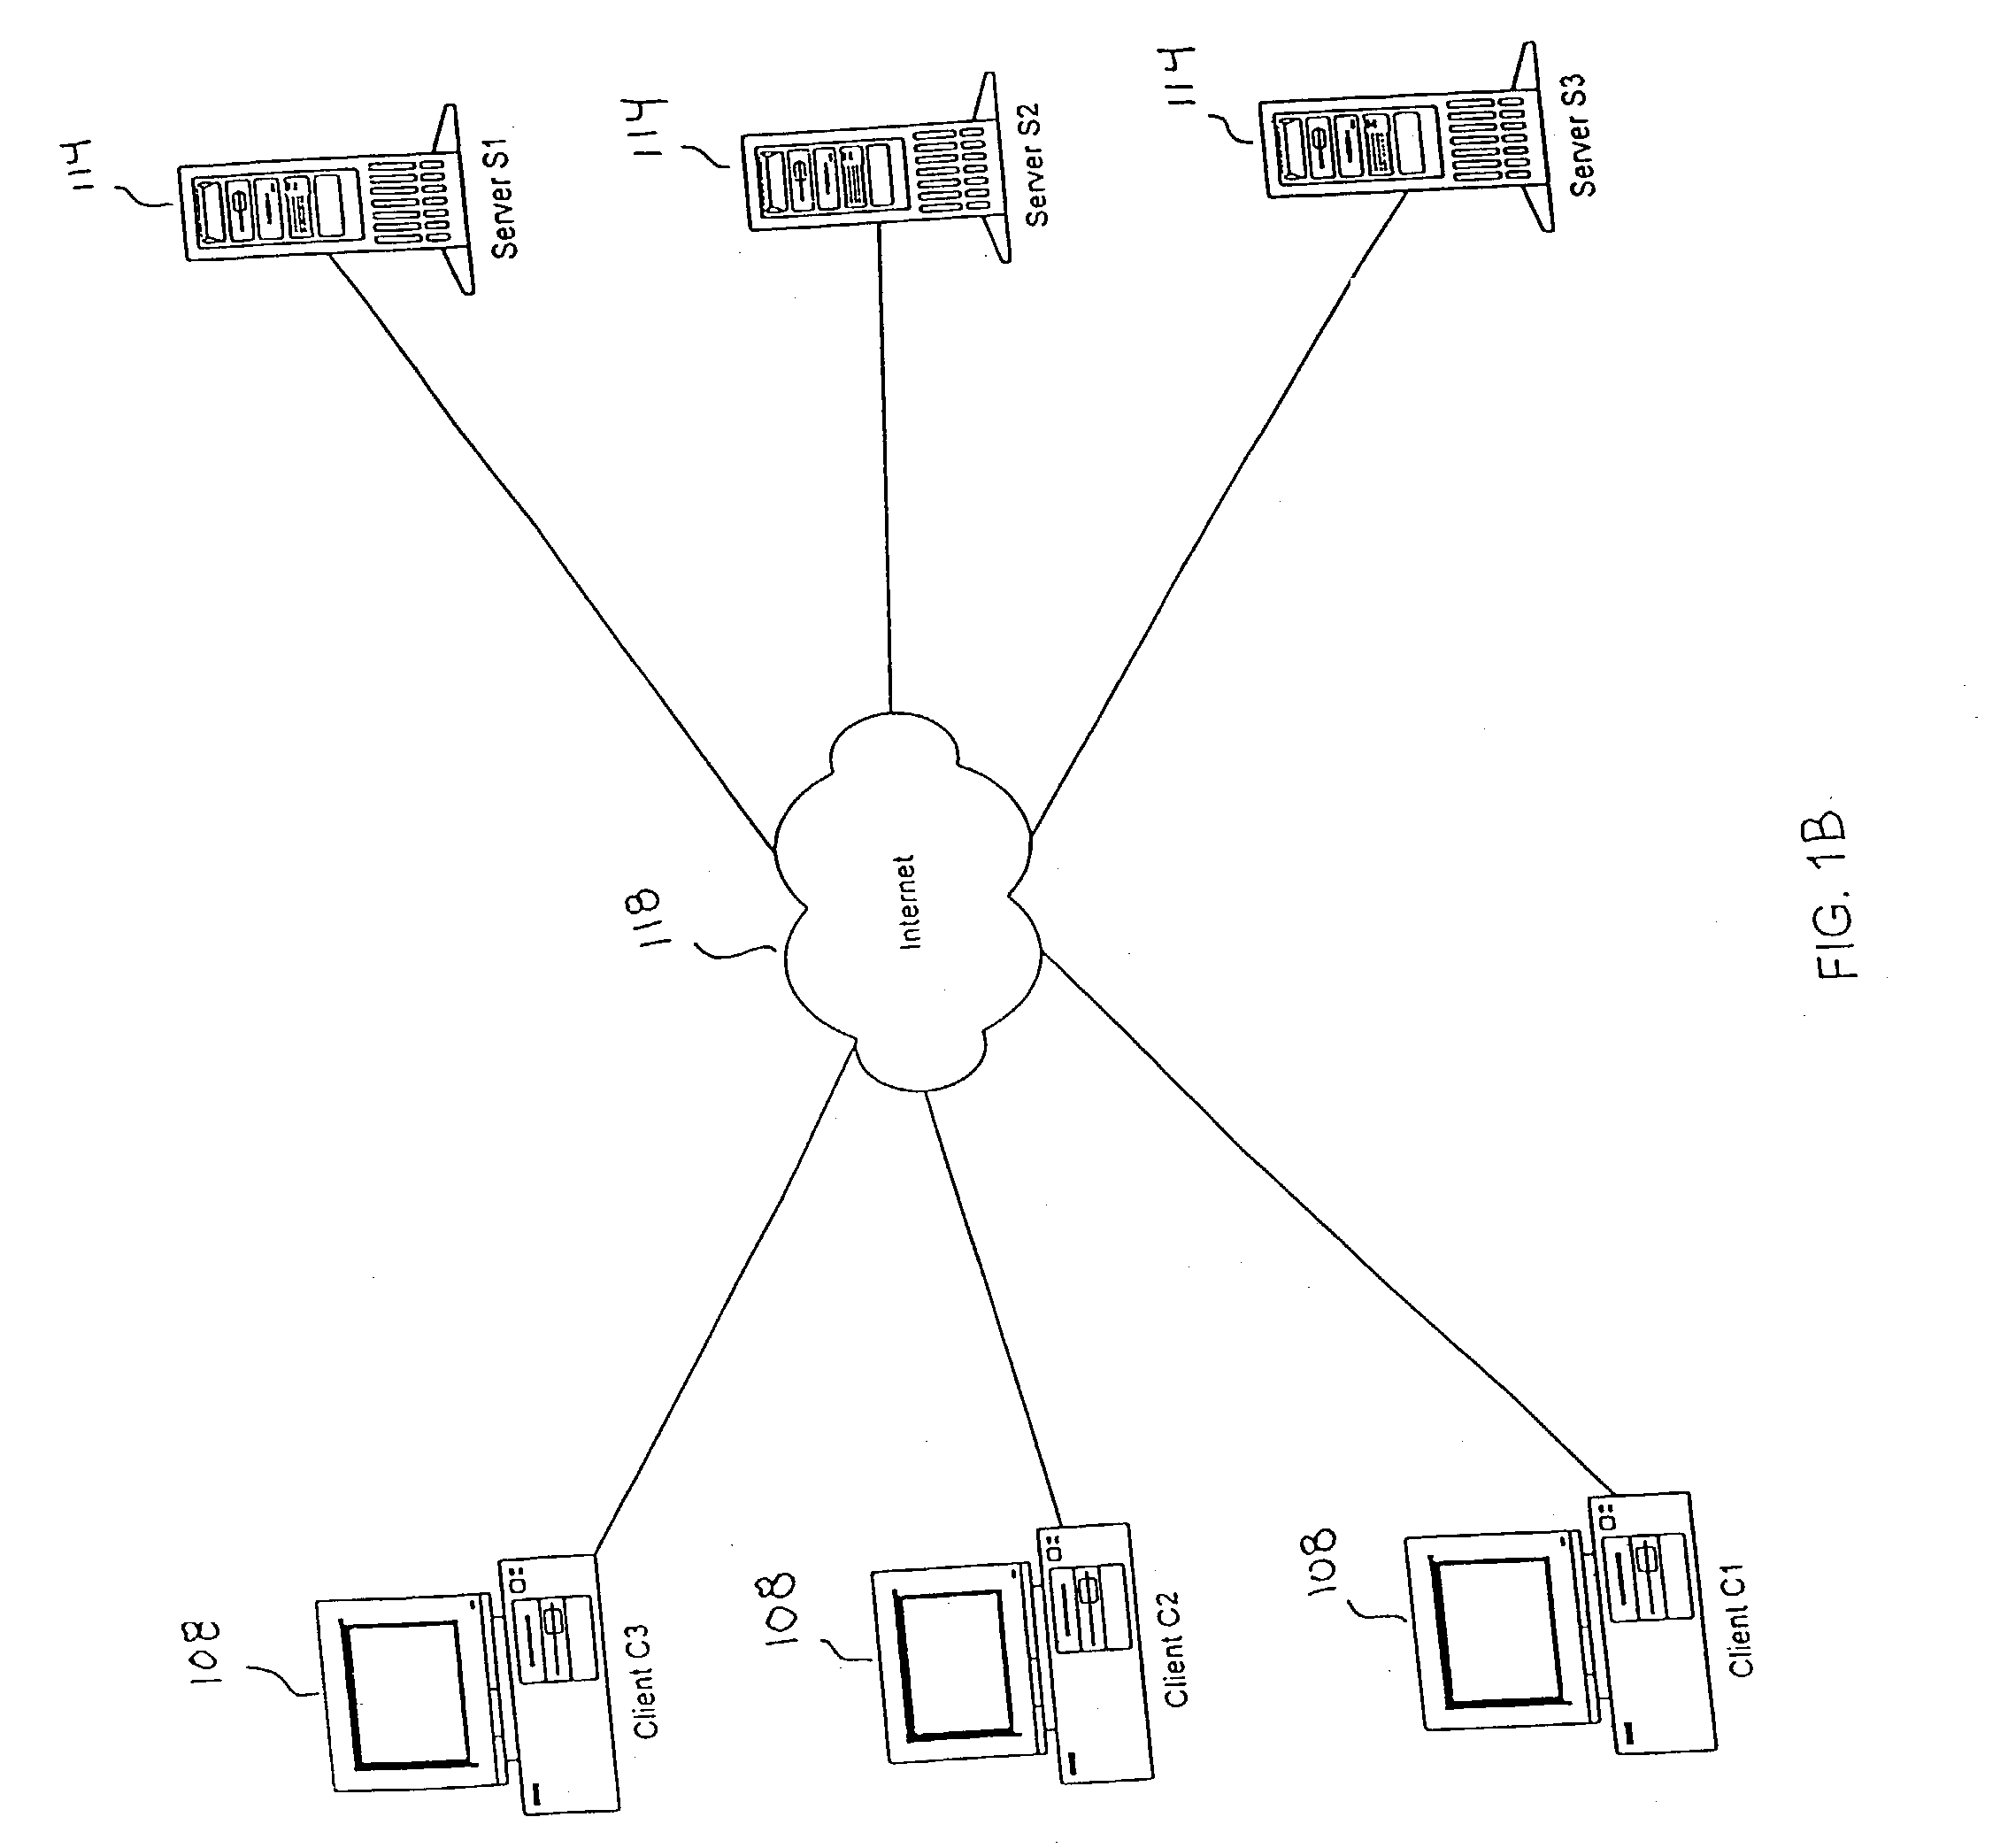 System, method and apparatus for utilizing transaction databases in a client - server environment